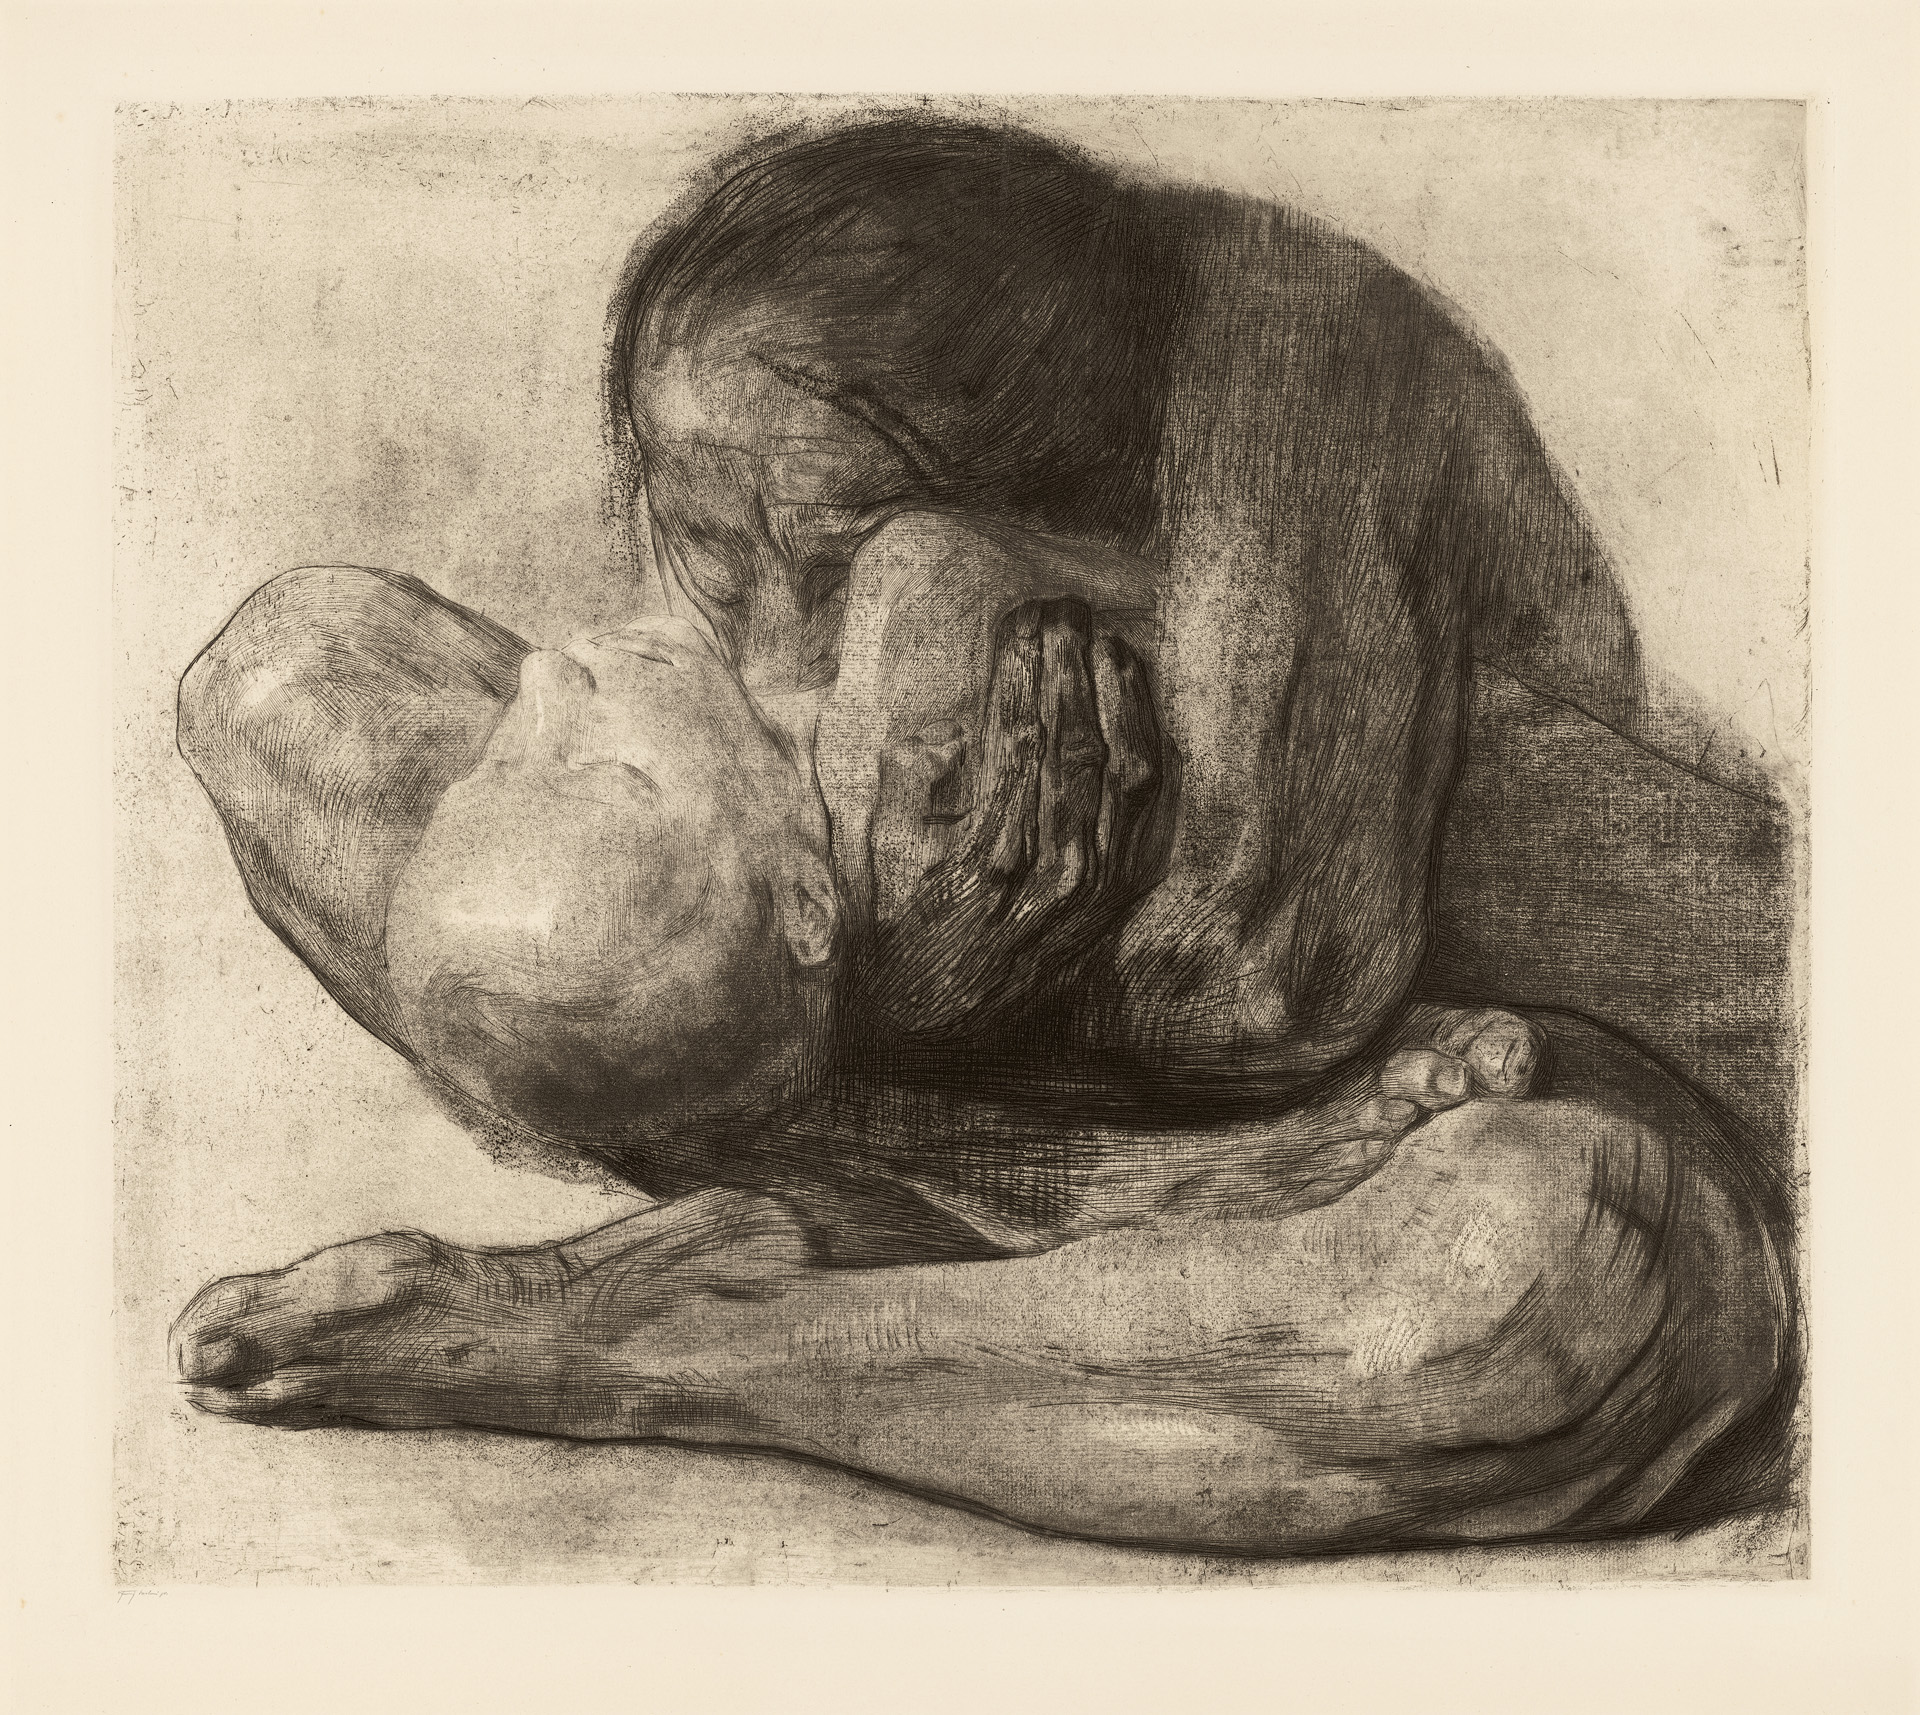 Käthe Kollwitz, Woman with dead Child, 1903, line etching, drypoint, sandpaper and soft ground with imprint of ribbed laid paper and Ziegler's transfer paper, Kn 81 VIII a, Cologne Kollwitz Collection © Käthe Kollwitz Museum Köln